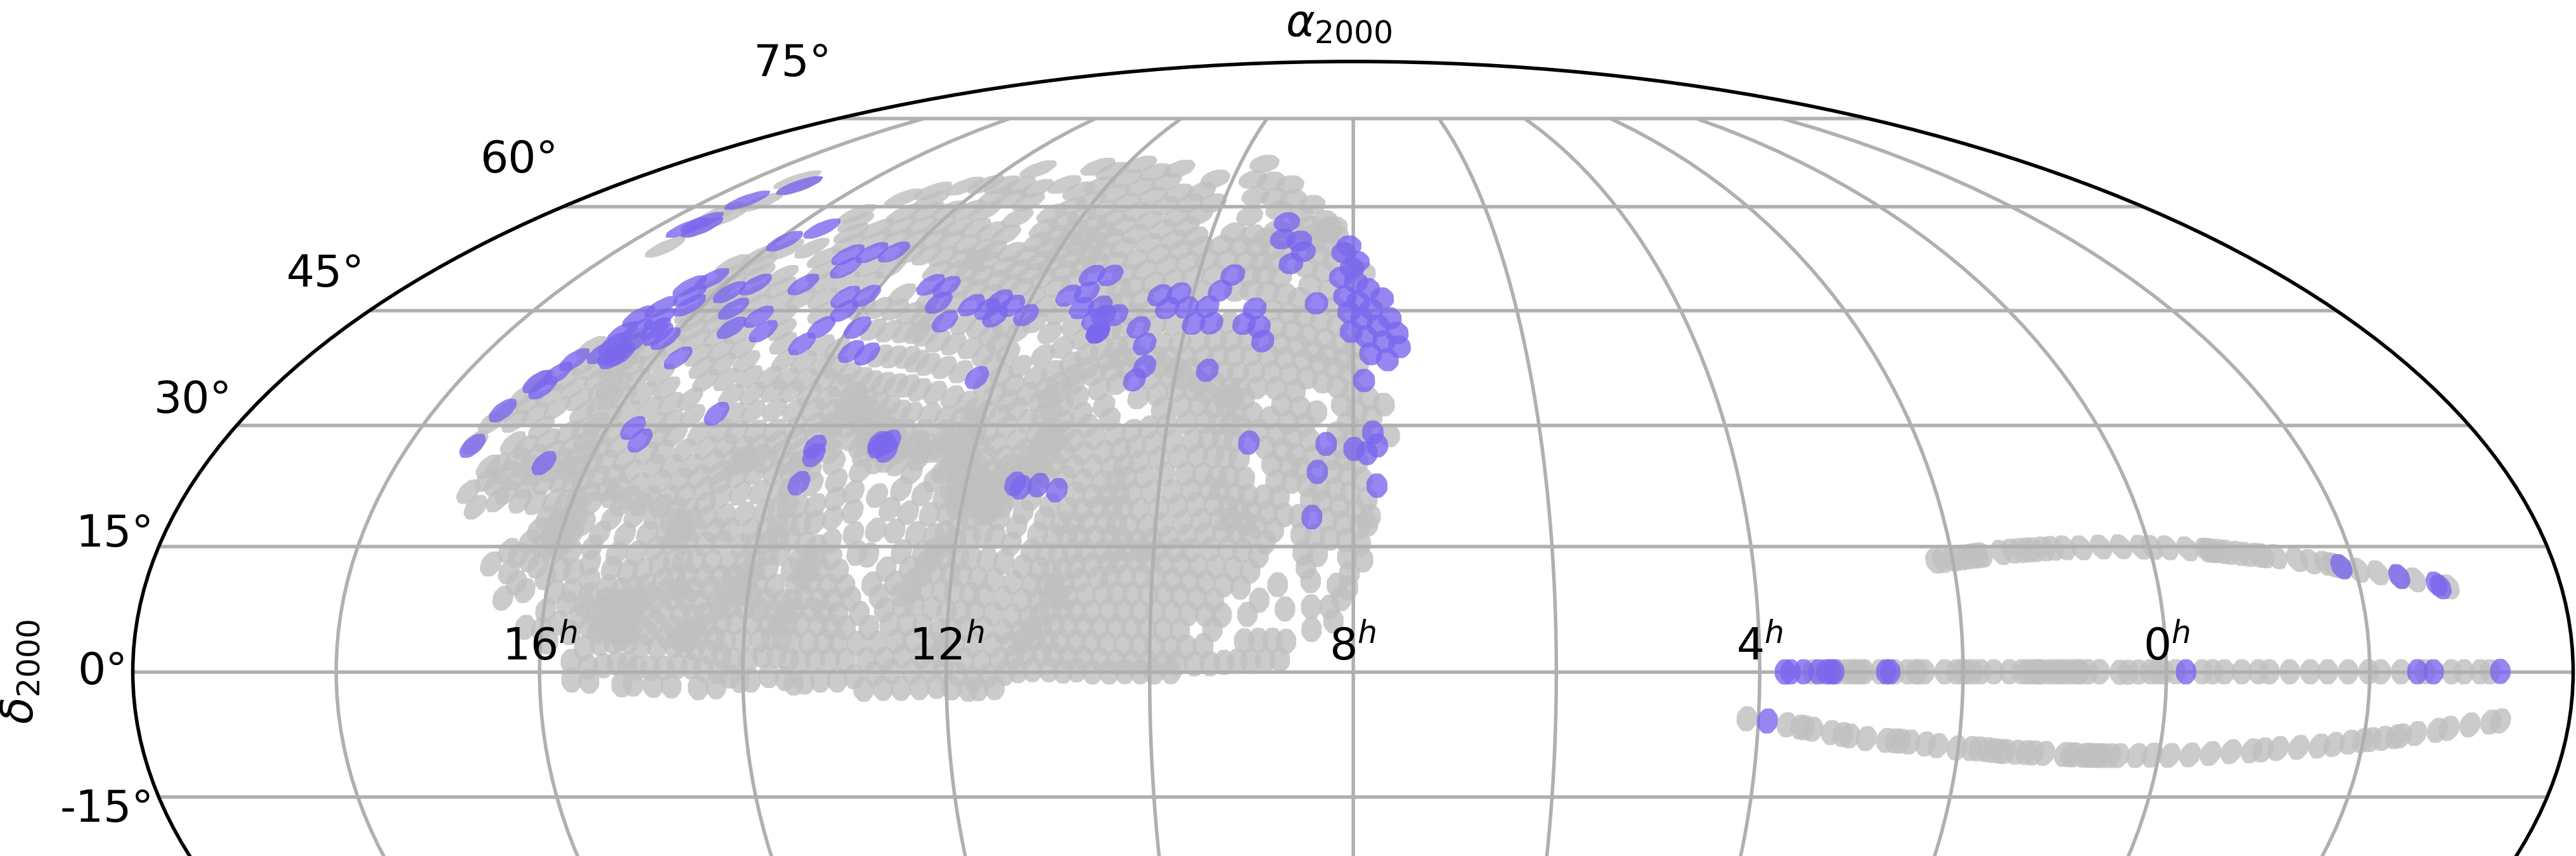 DR16 MaNGA spectroscopic coverage: observed plates are shown in blue.